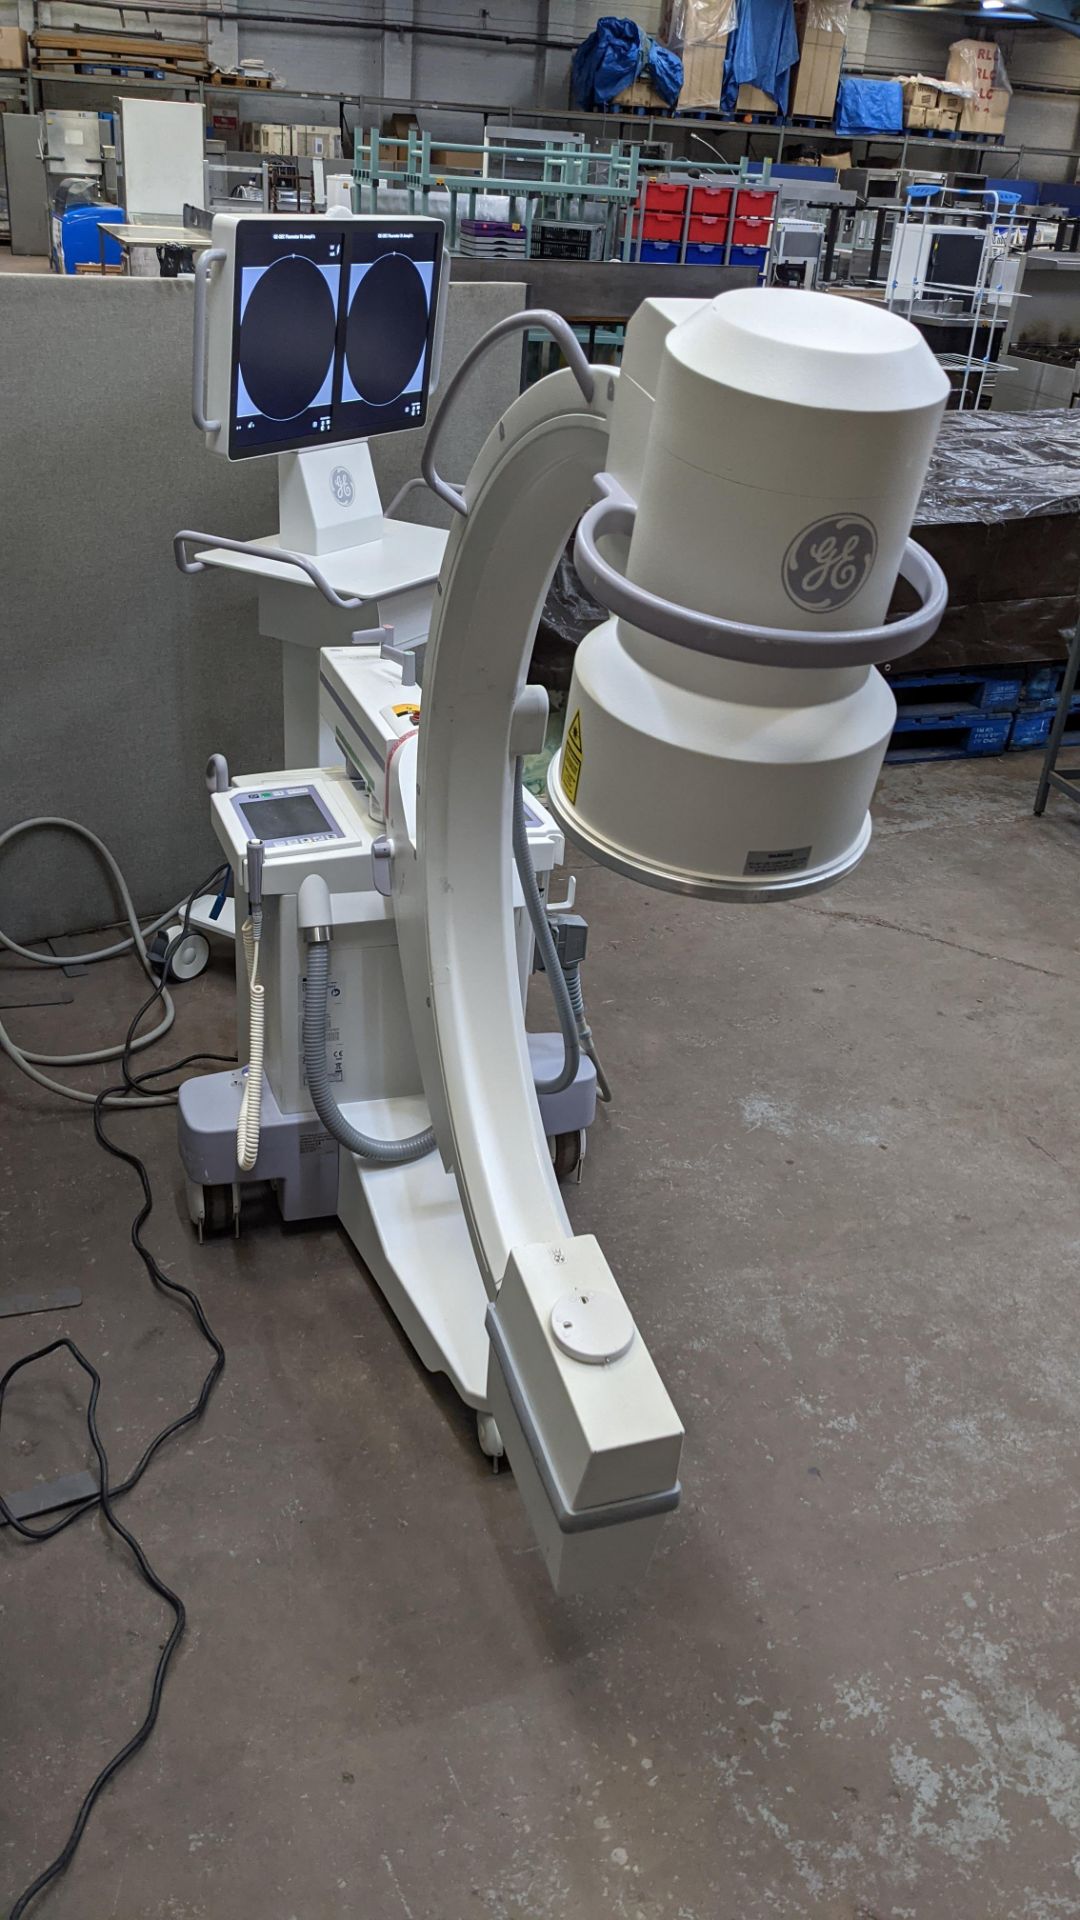 GE-OEC Fluorostar imaging system, purchased new in August 2017. EO4 Series. - Image 11 of 68